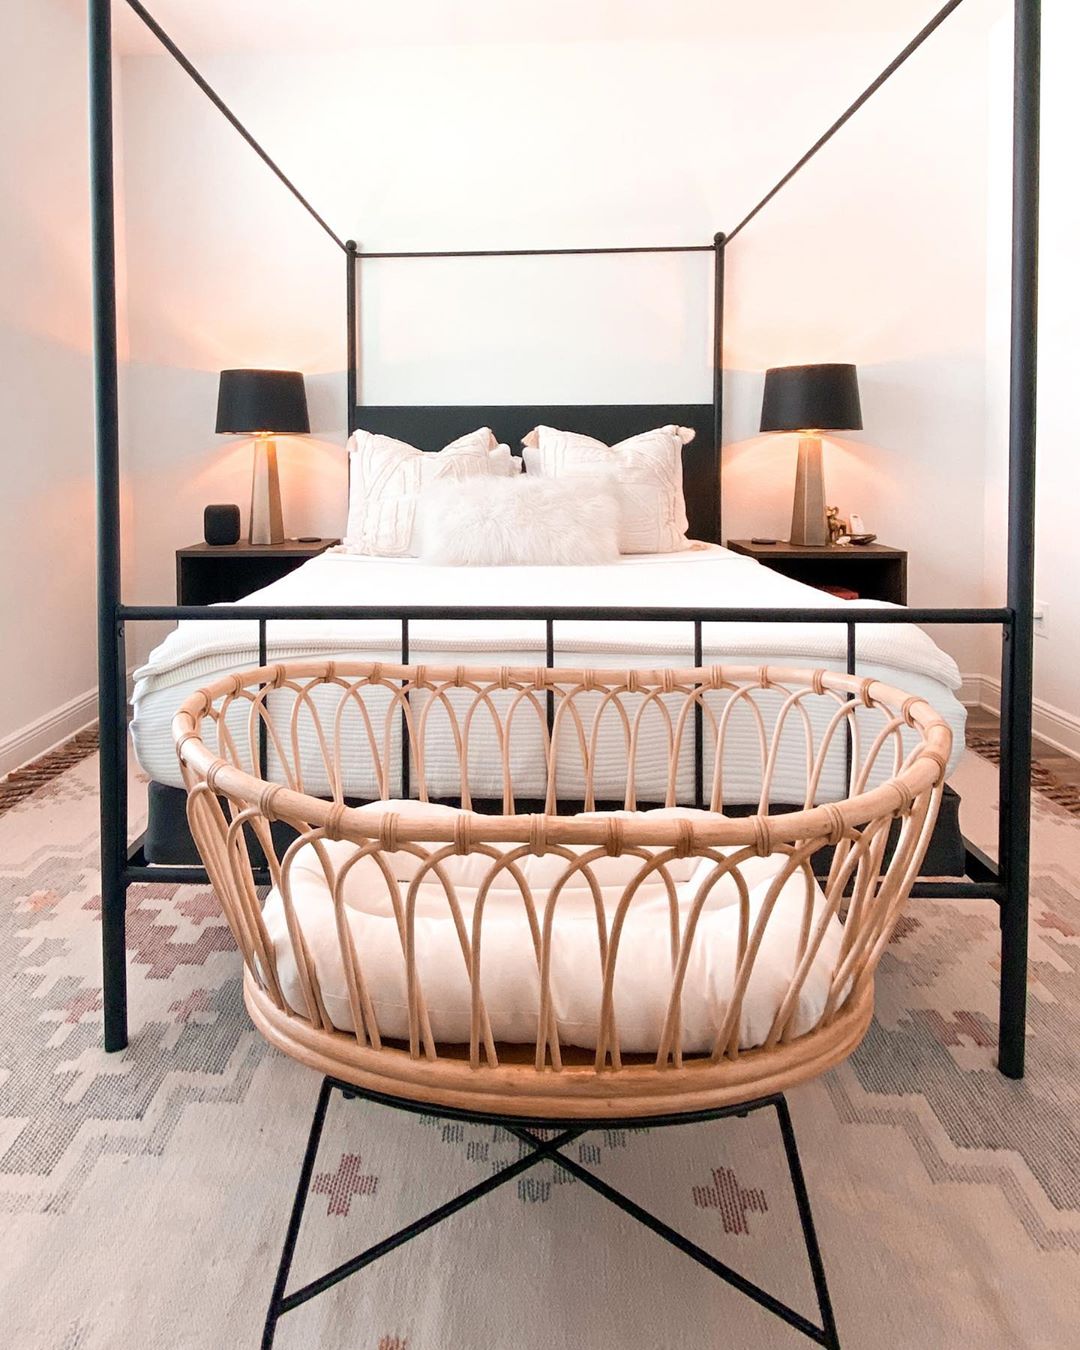 Master bedroom with bassinet. Photo by Instagram user @themomllenial